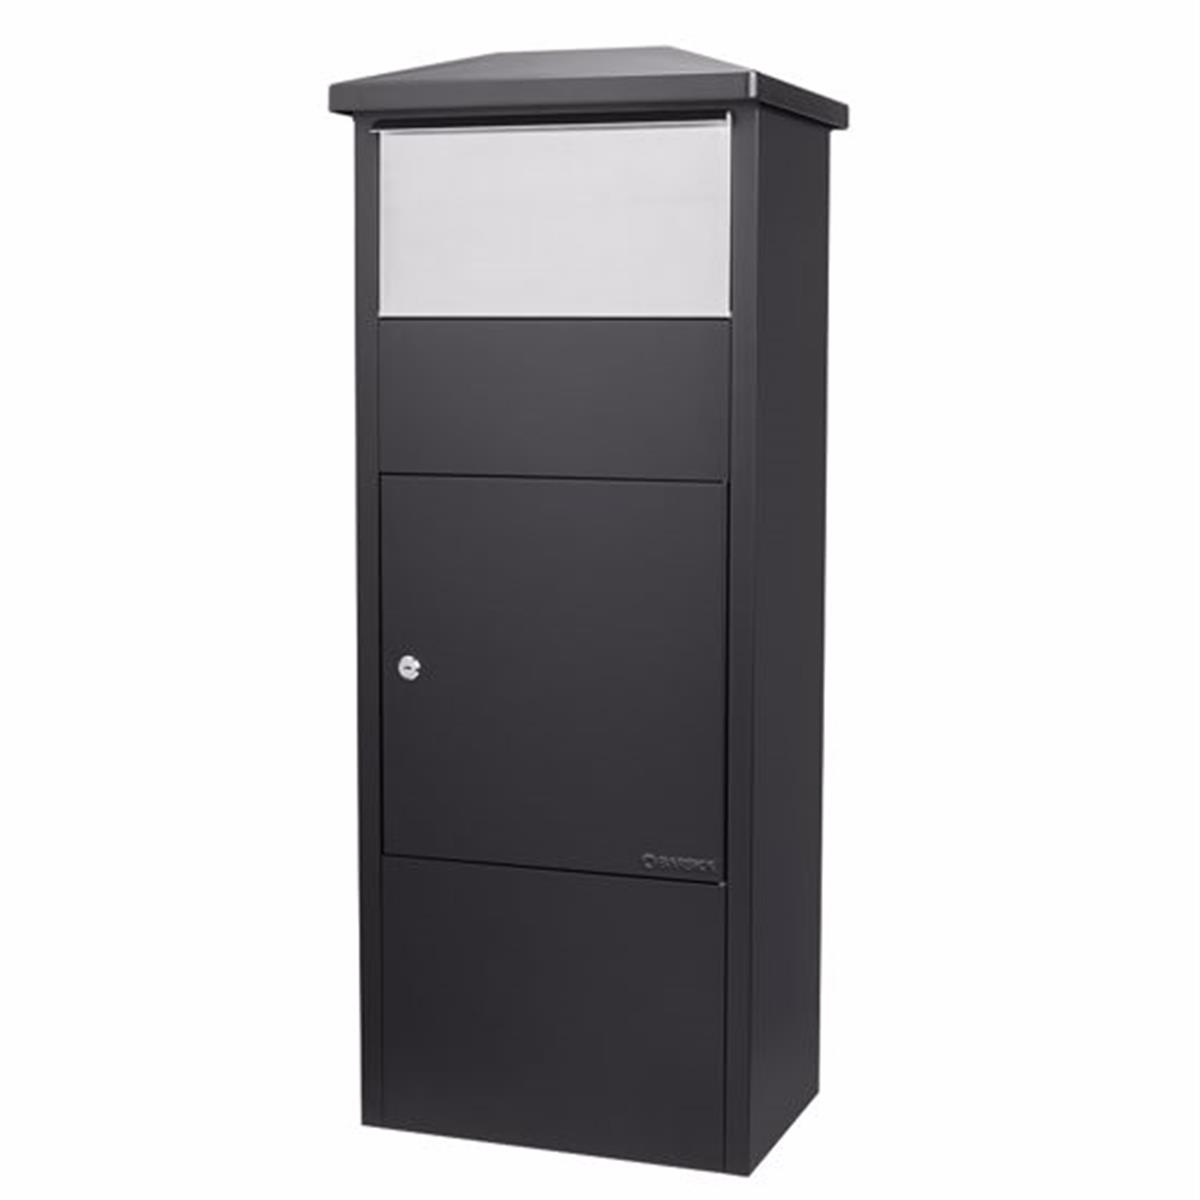 Picture of Barska CB13324 MPB-500 Parcel Mail Box with Stainless Steel Drop Door - Black